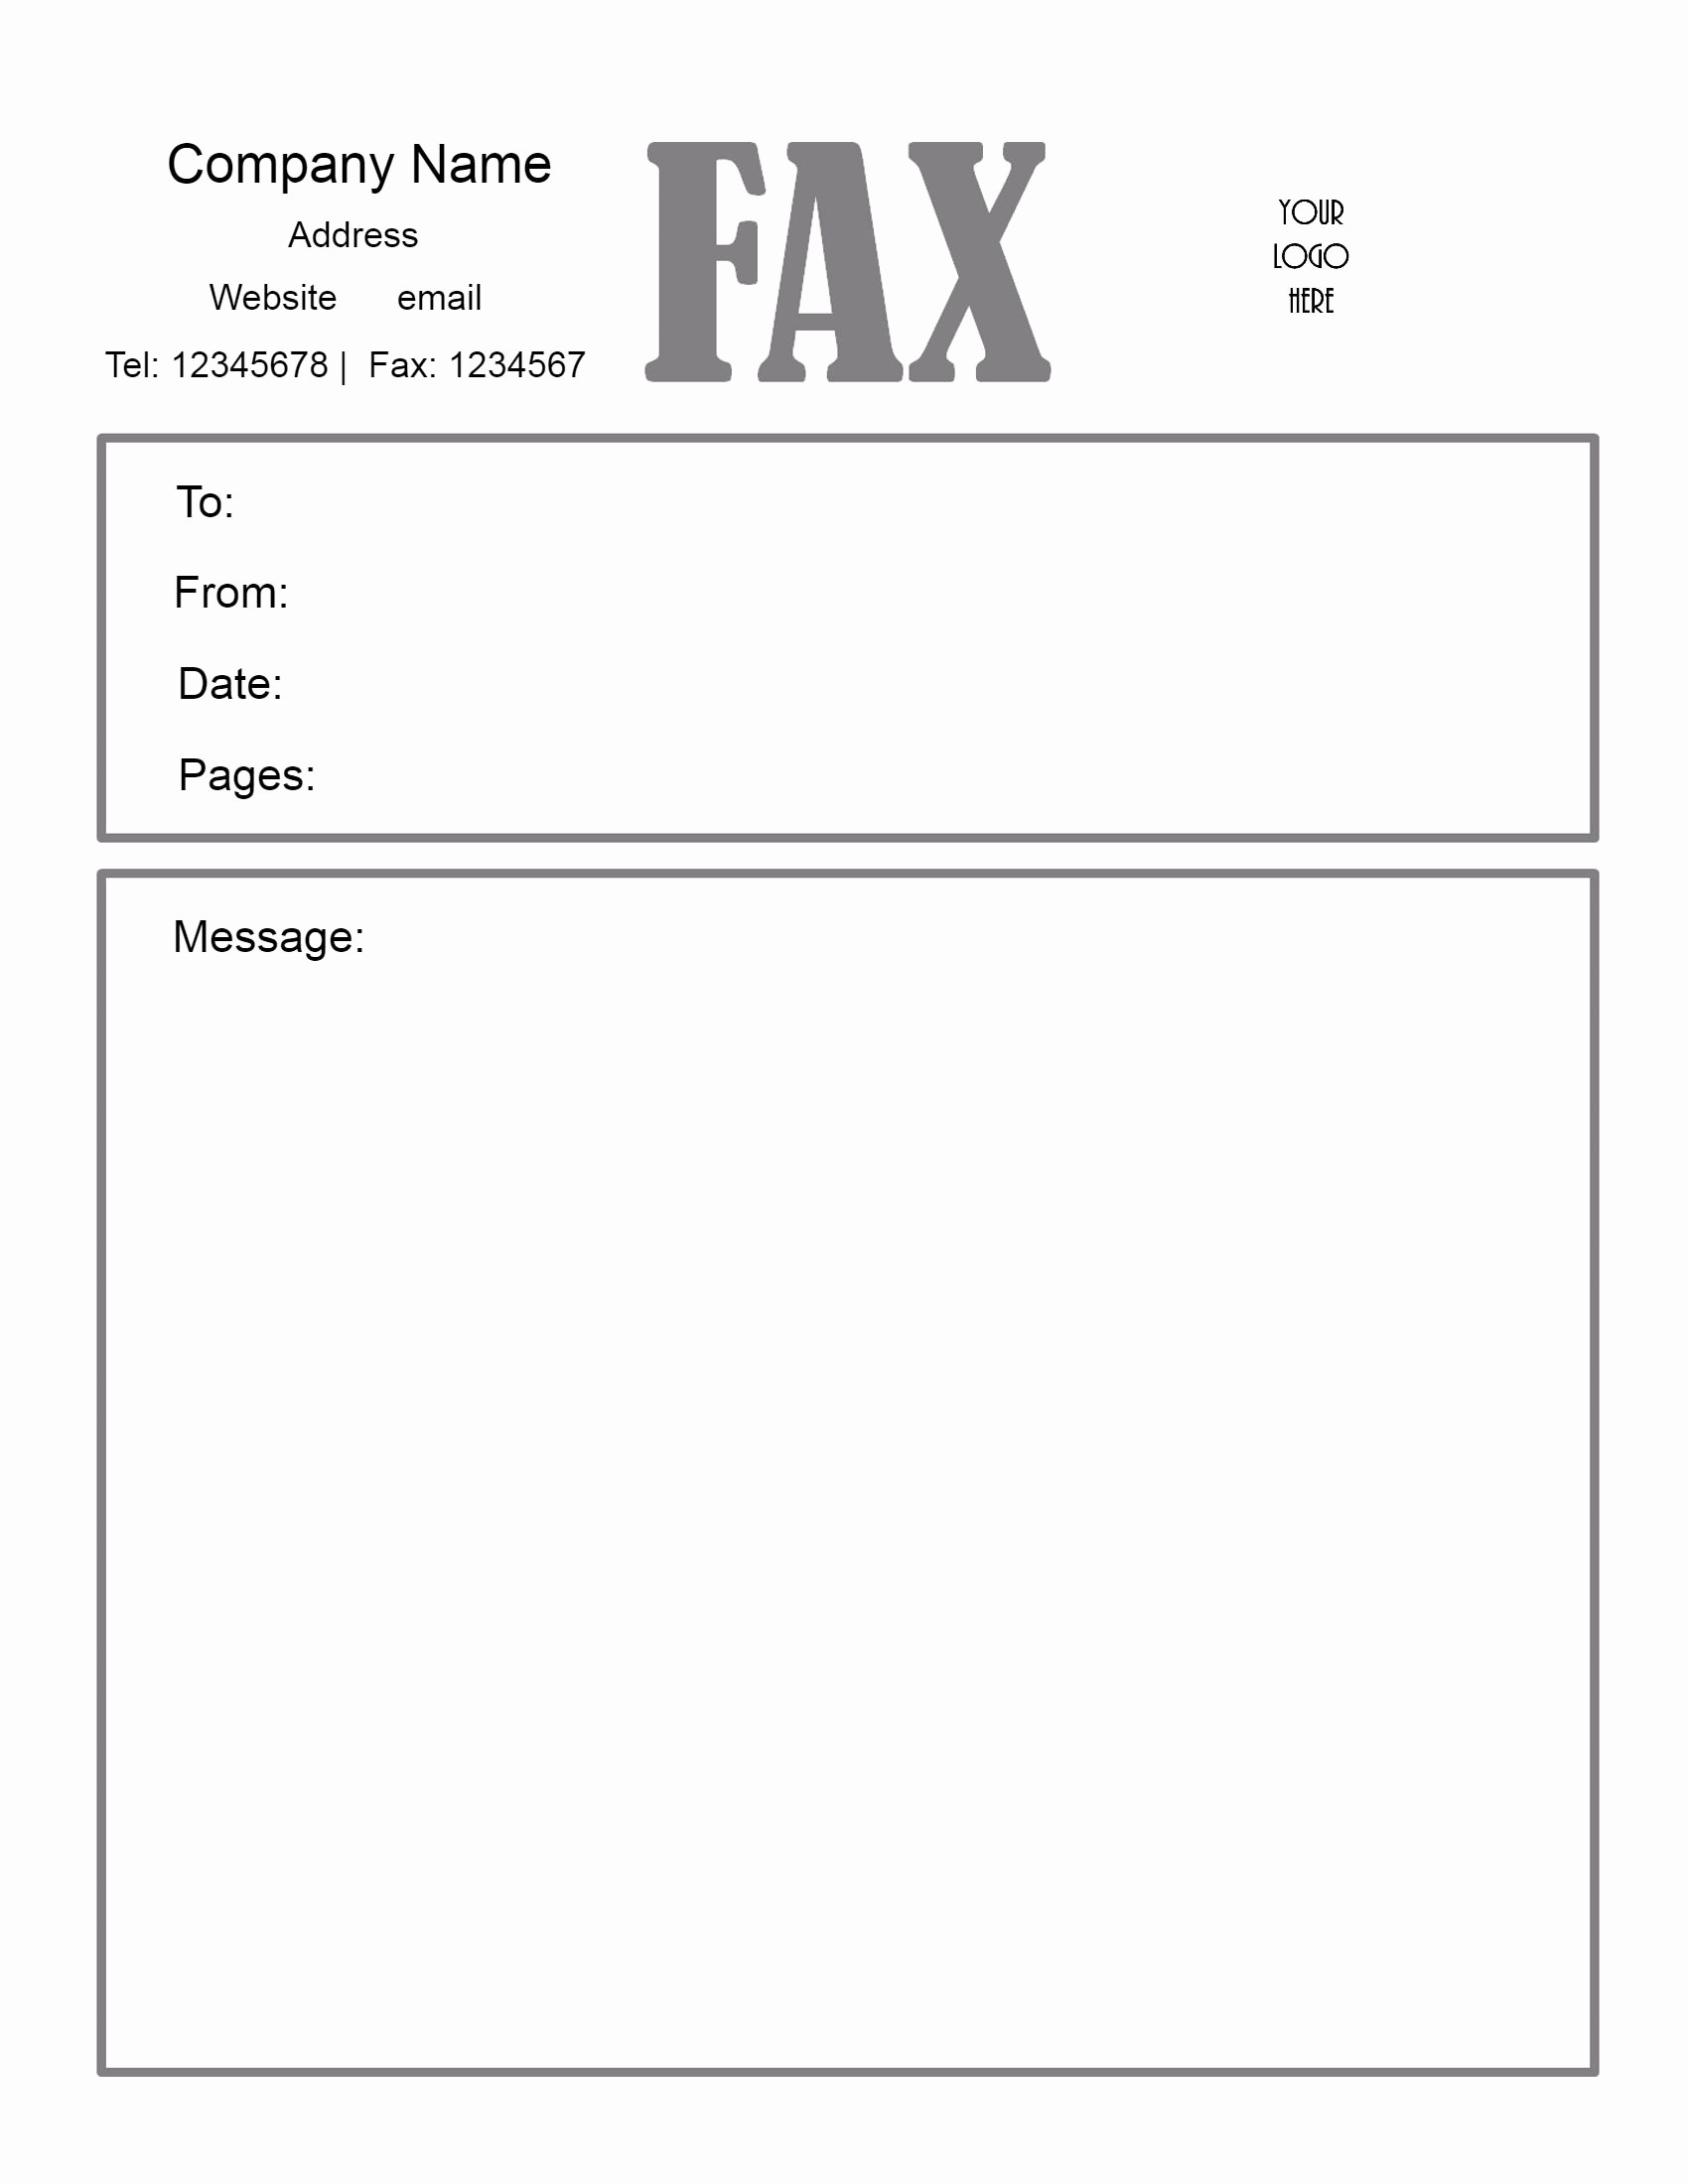 Free Fax Cover Letter Template Luxury Free Fax Cover Letter Template